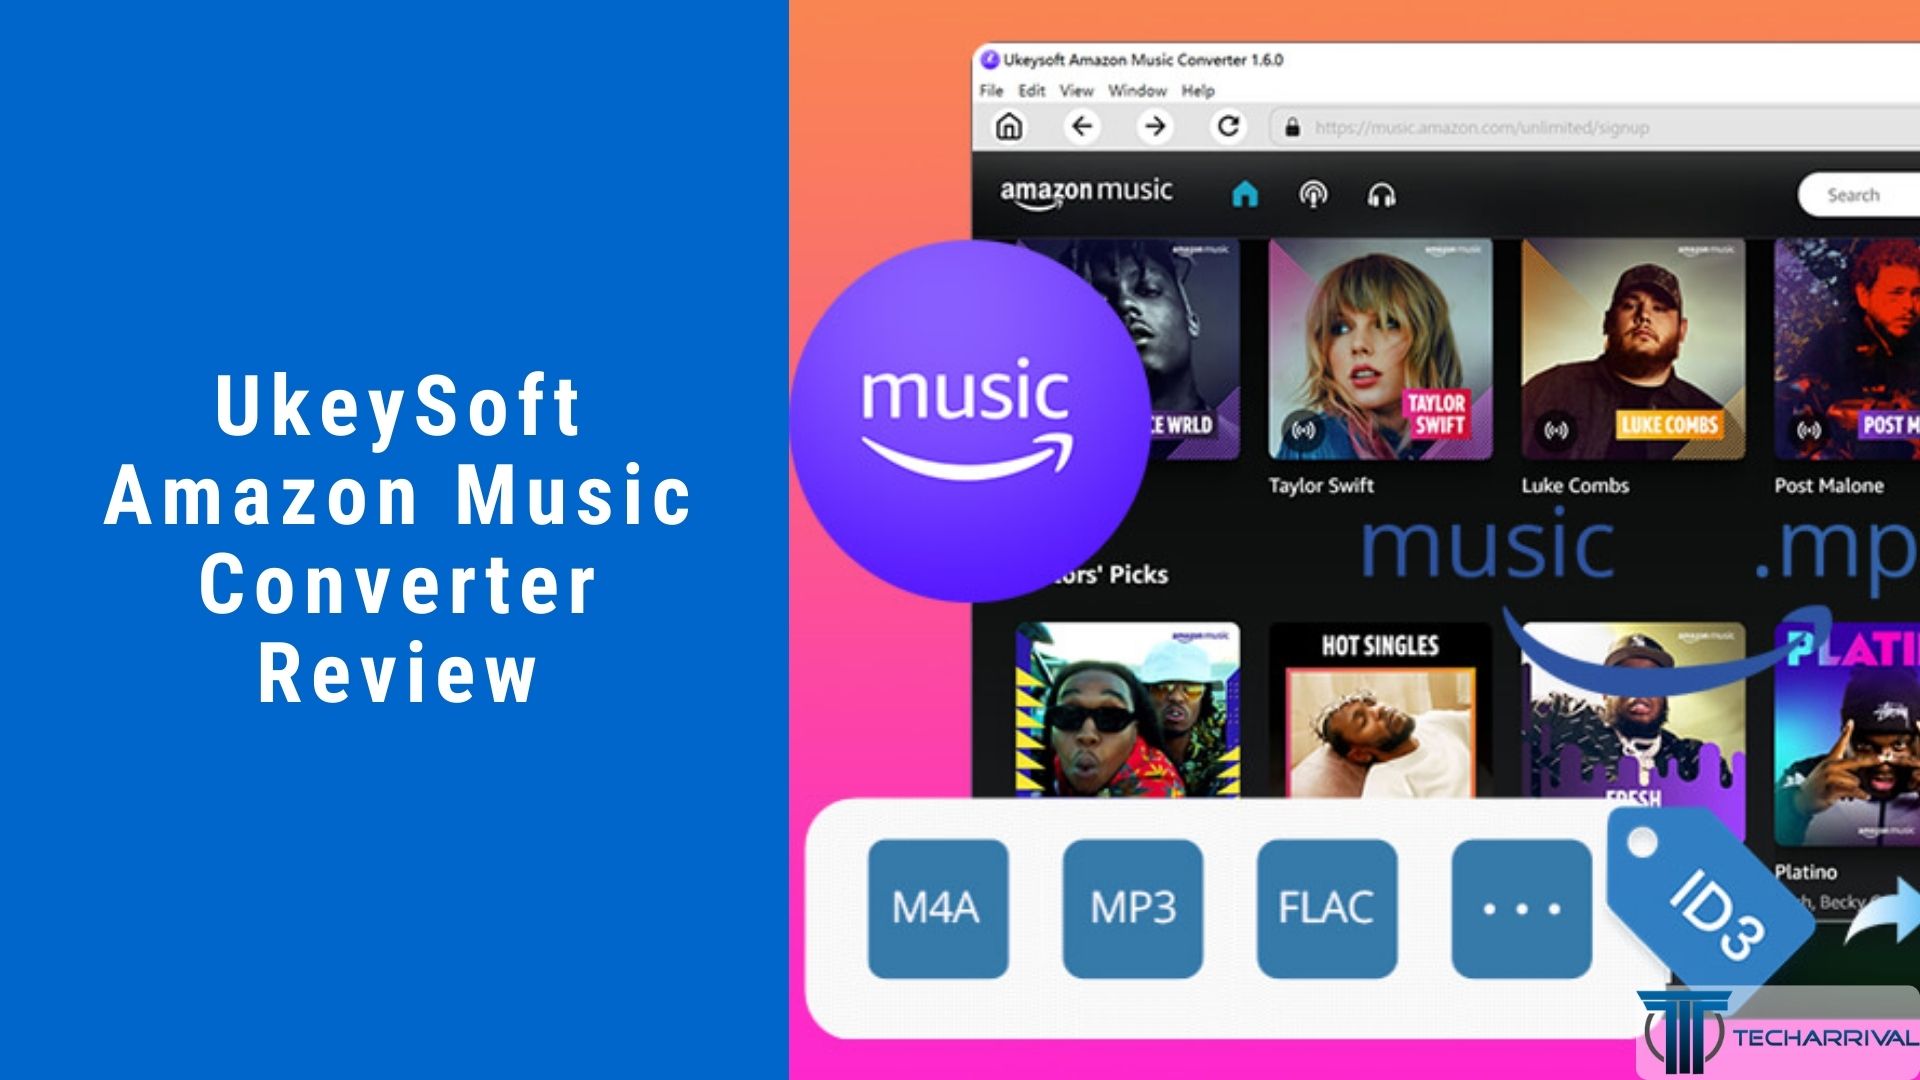 UkeySoft Amazon Music Converter Review: Convert Amazon Music to MP3 Quickly